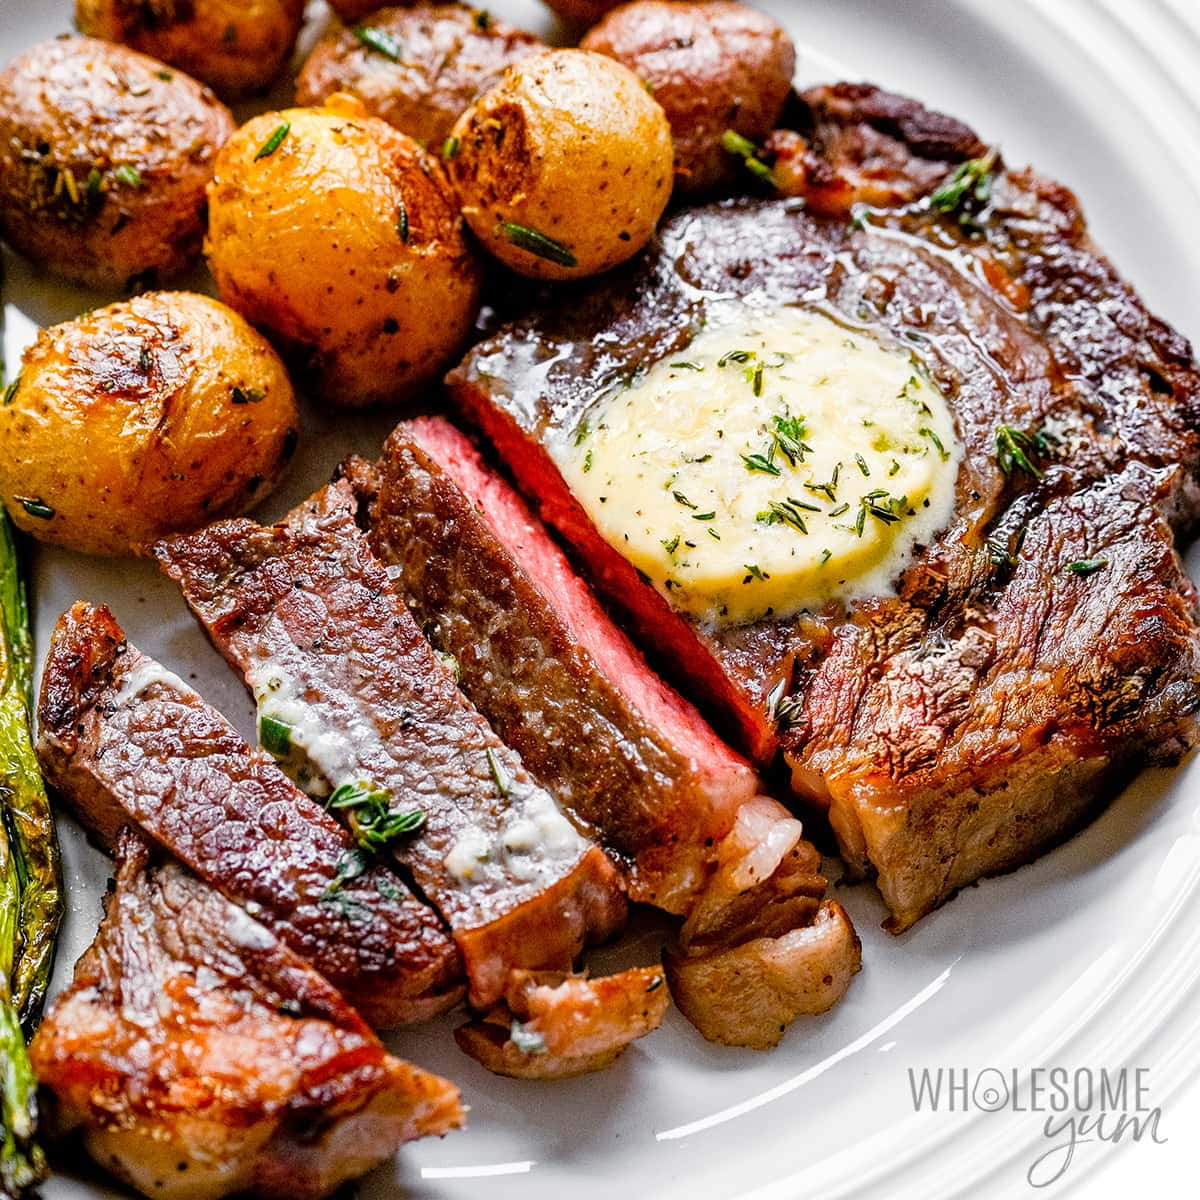 A Plate With Steak, Potatoes And Butter